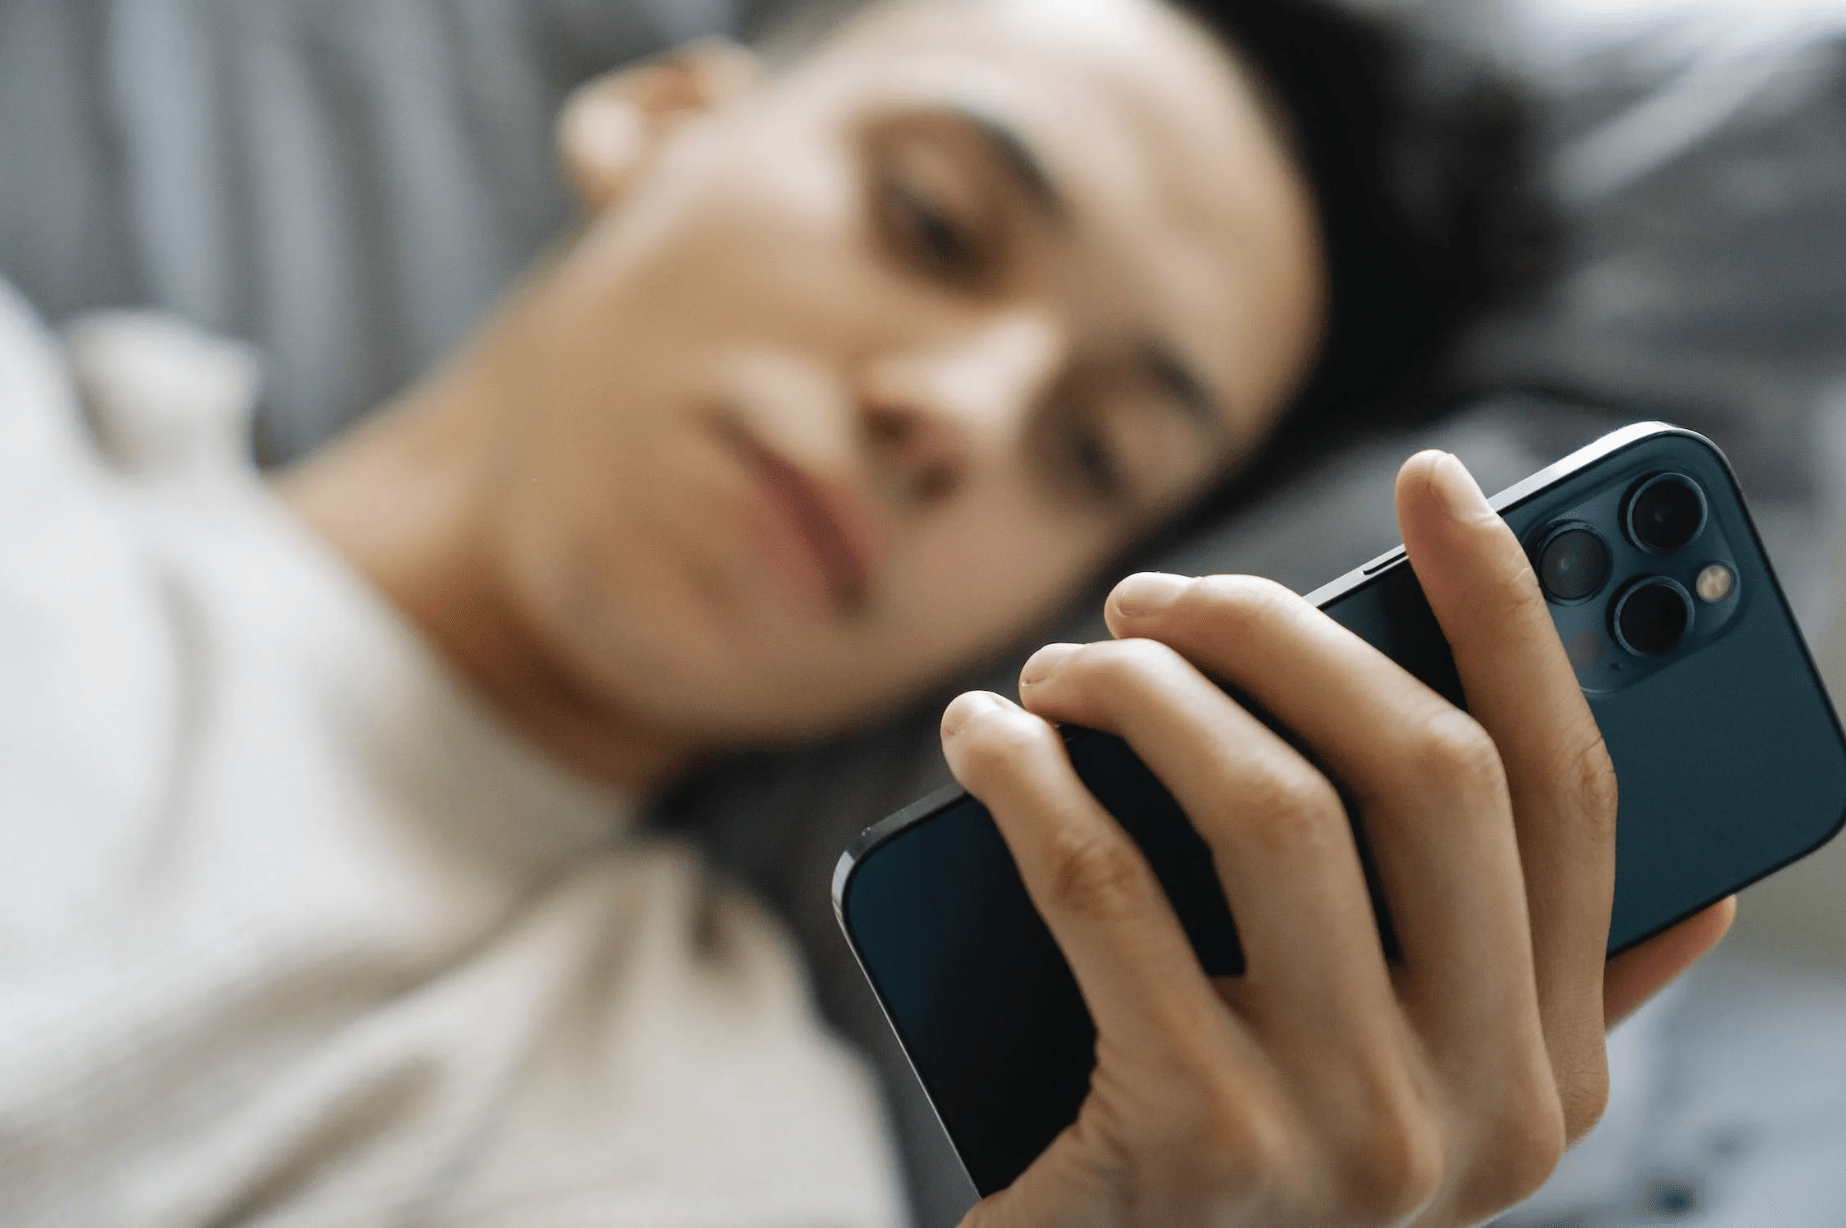 guy browsing mobile phone in bed